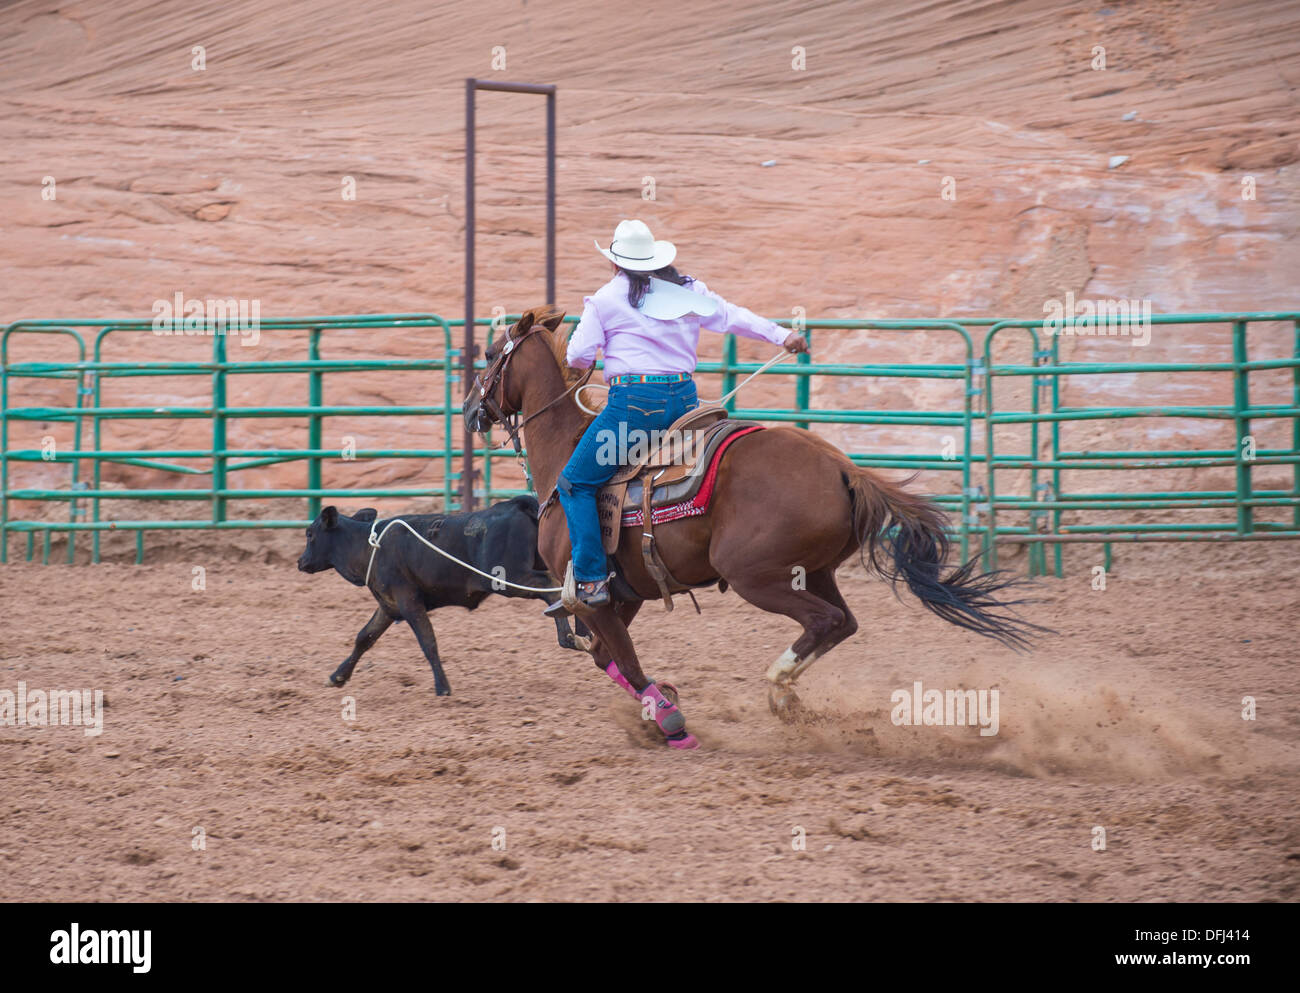 cowgirl Participates in in a Calf roping Competition at the 92nd annual Indian Rodeo in Gallup, NM Stock Photo